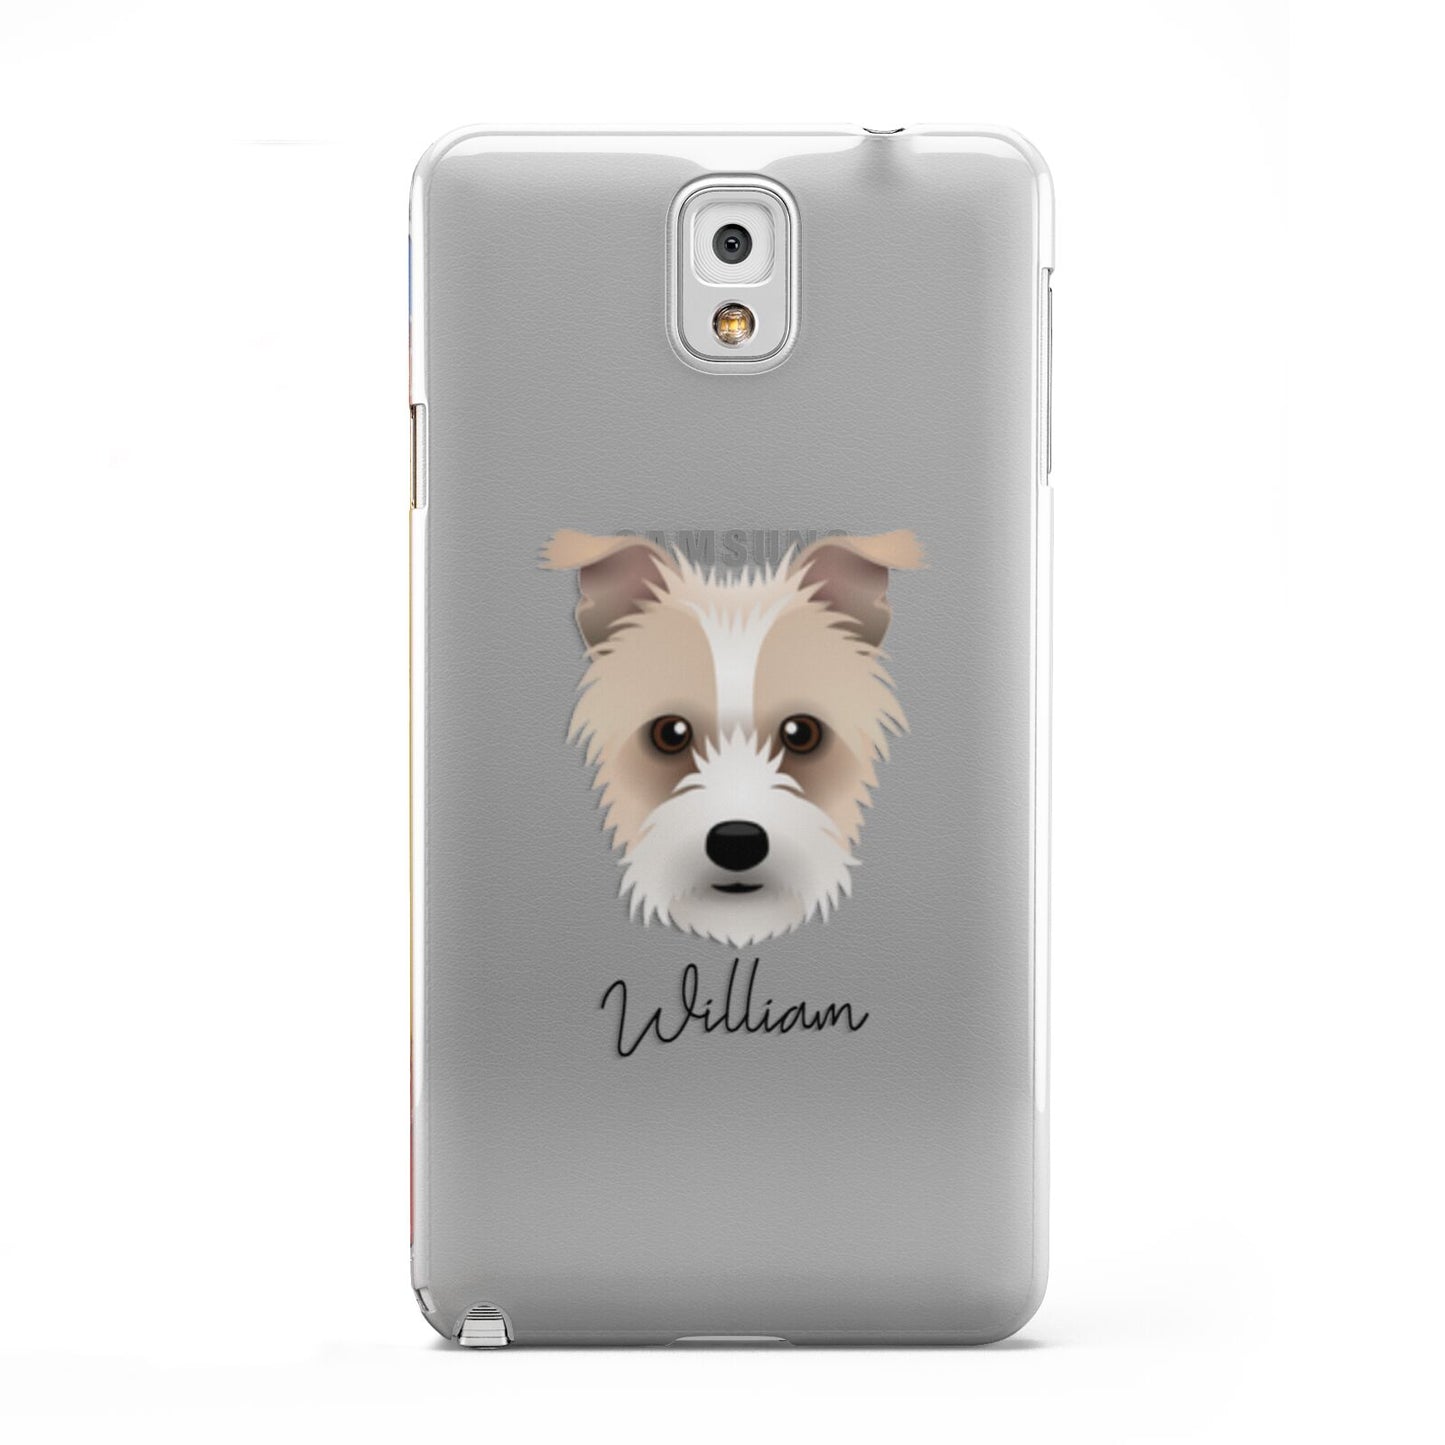 Sporting Lucas Terrier Personalised Samsung Galaxy Note 3 Case